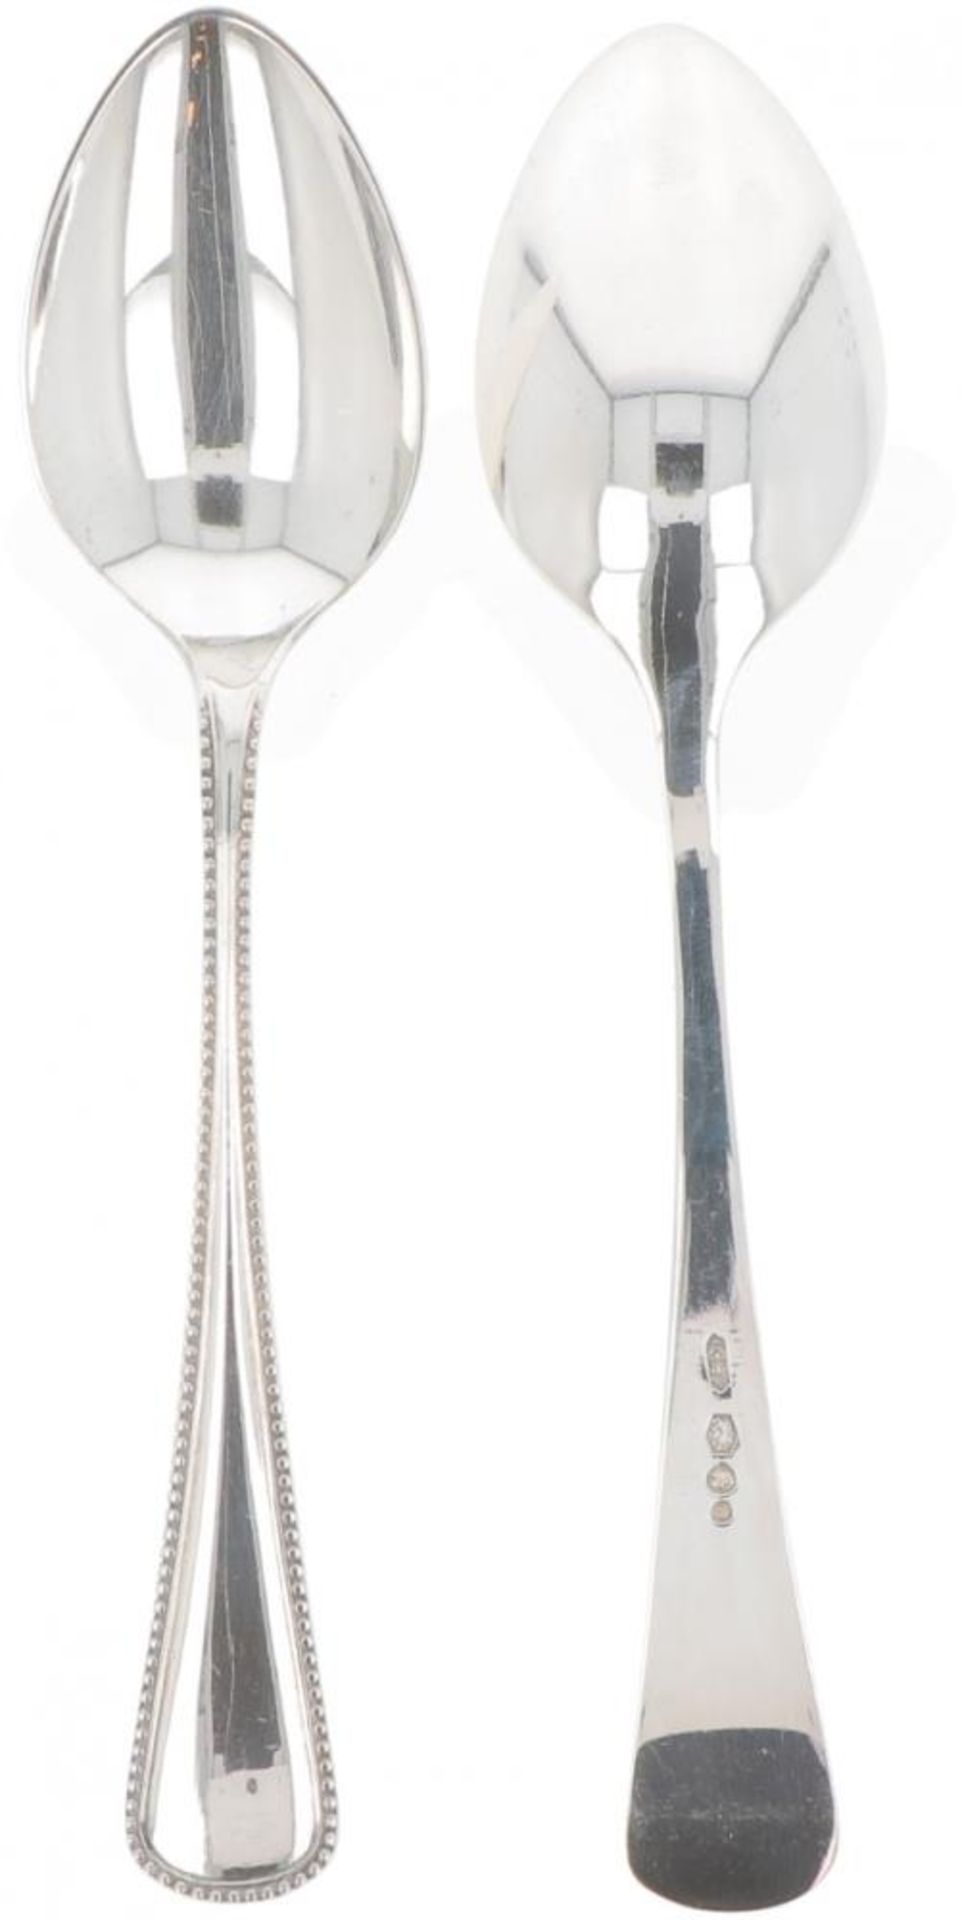 (12) piece set of ice cream / dessert spoons in silver case. - Image 2 of 3